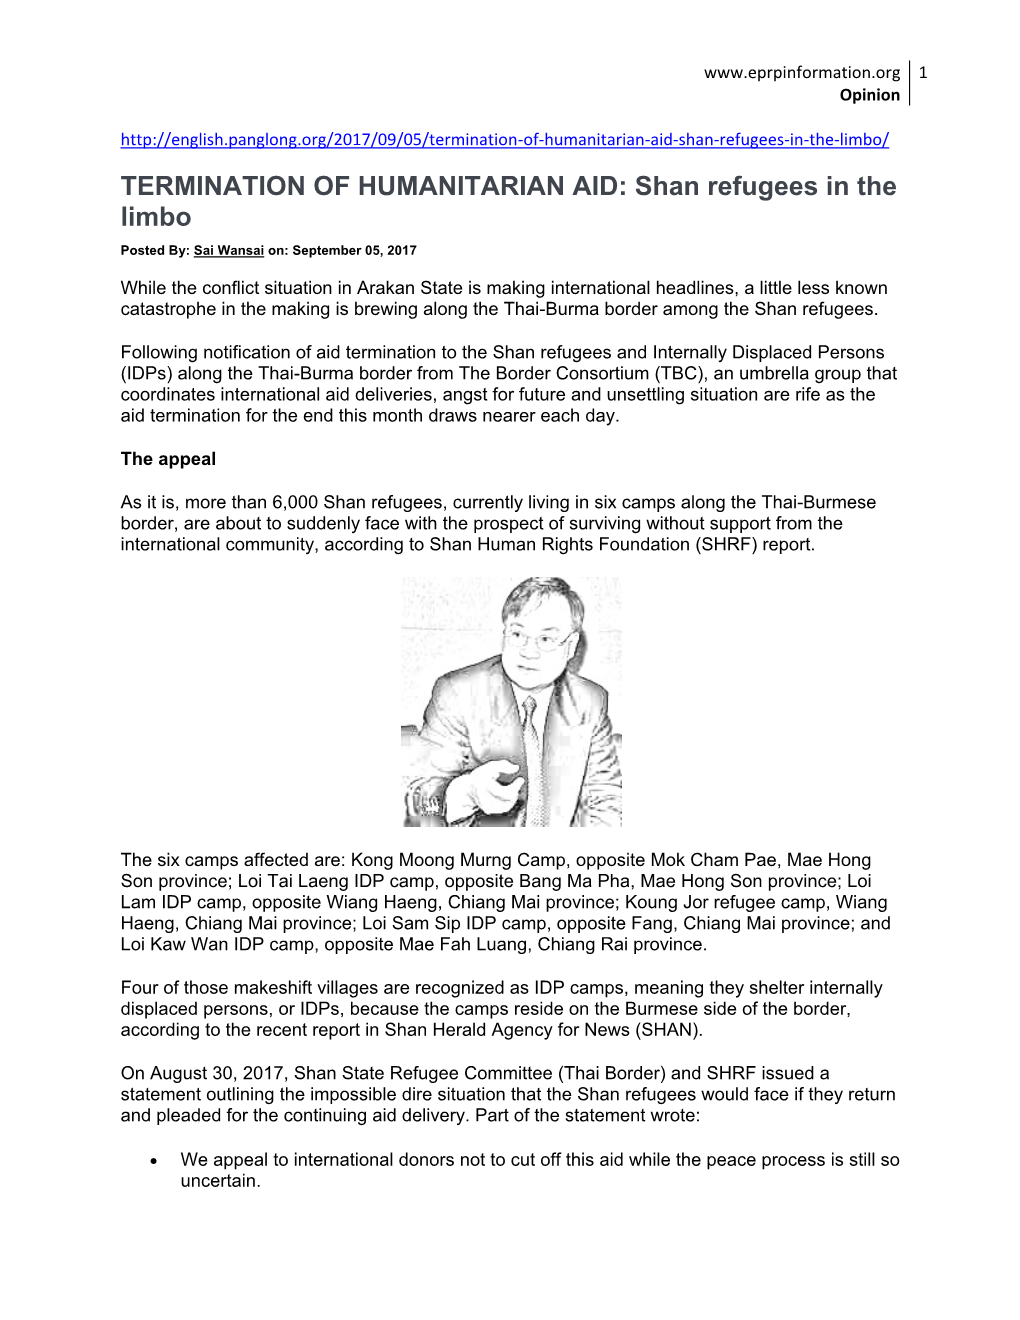 TERMINATION of HUMANITARIAN AID: Shan Refugees in the Limbo Posted By: Sai Wansai On: September 05, 2017